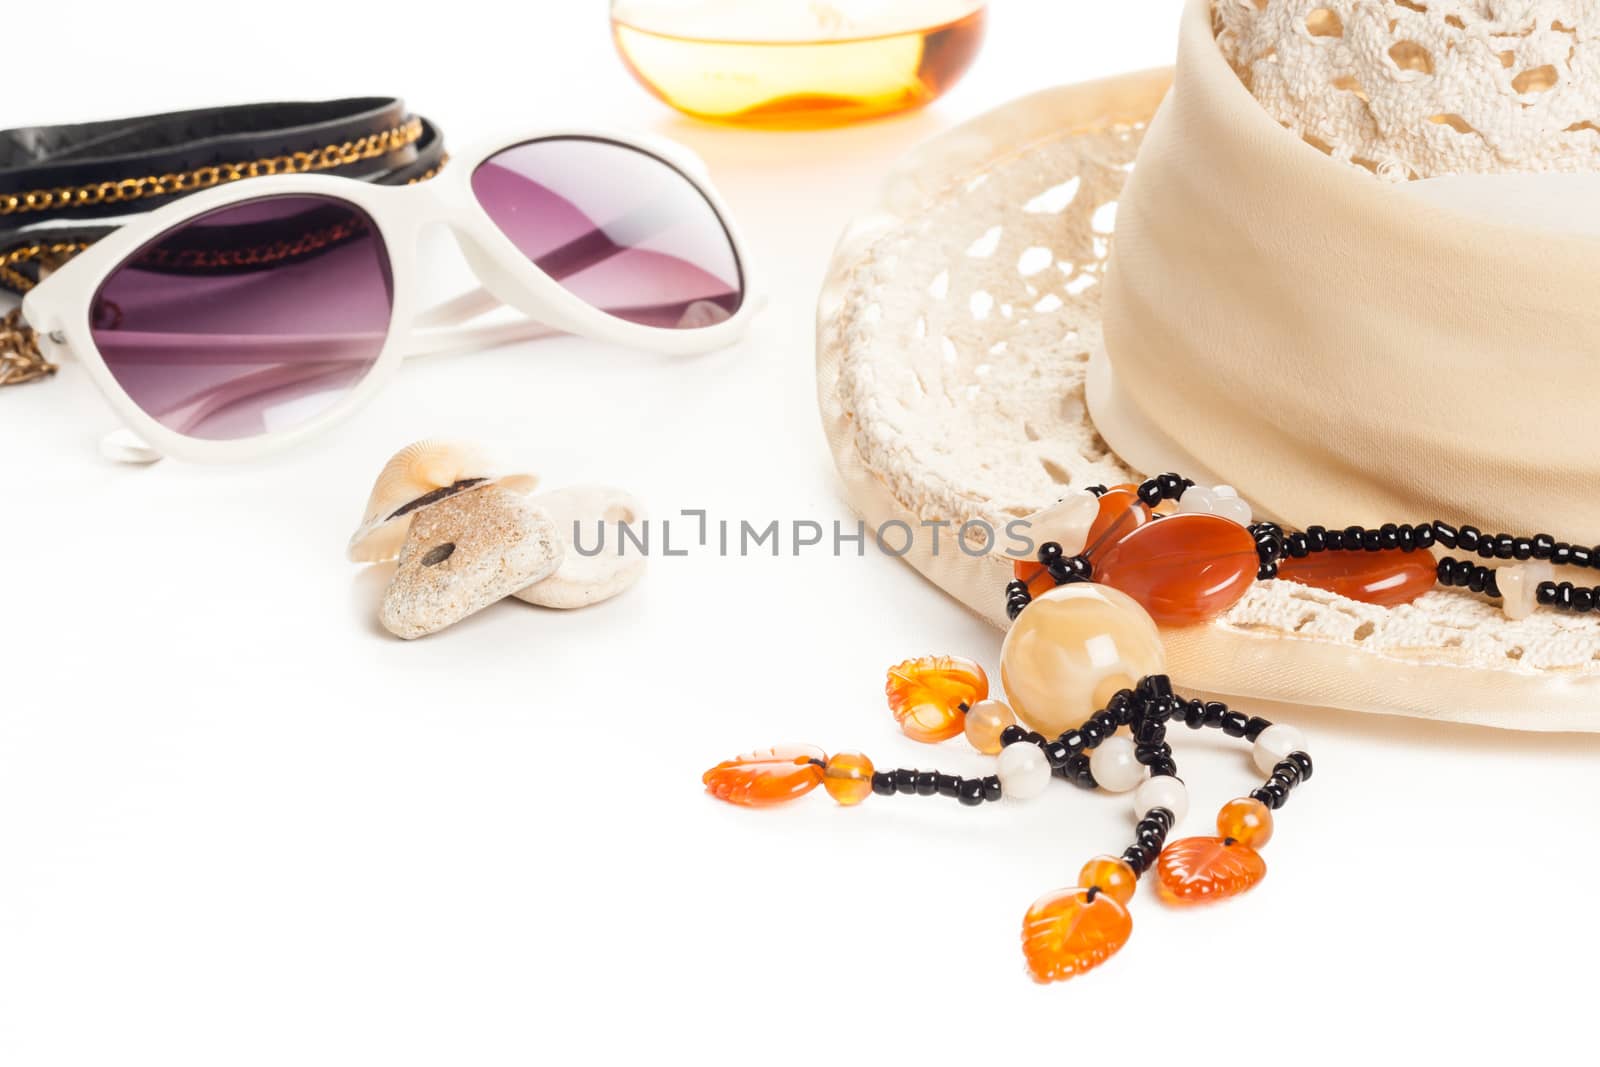 summer fashion accessories with hat, sunglasses, necklace, perfume